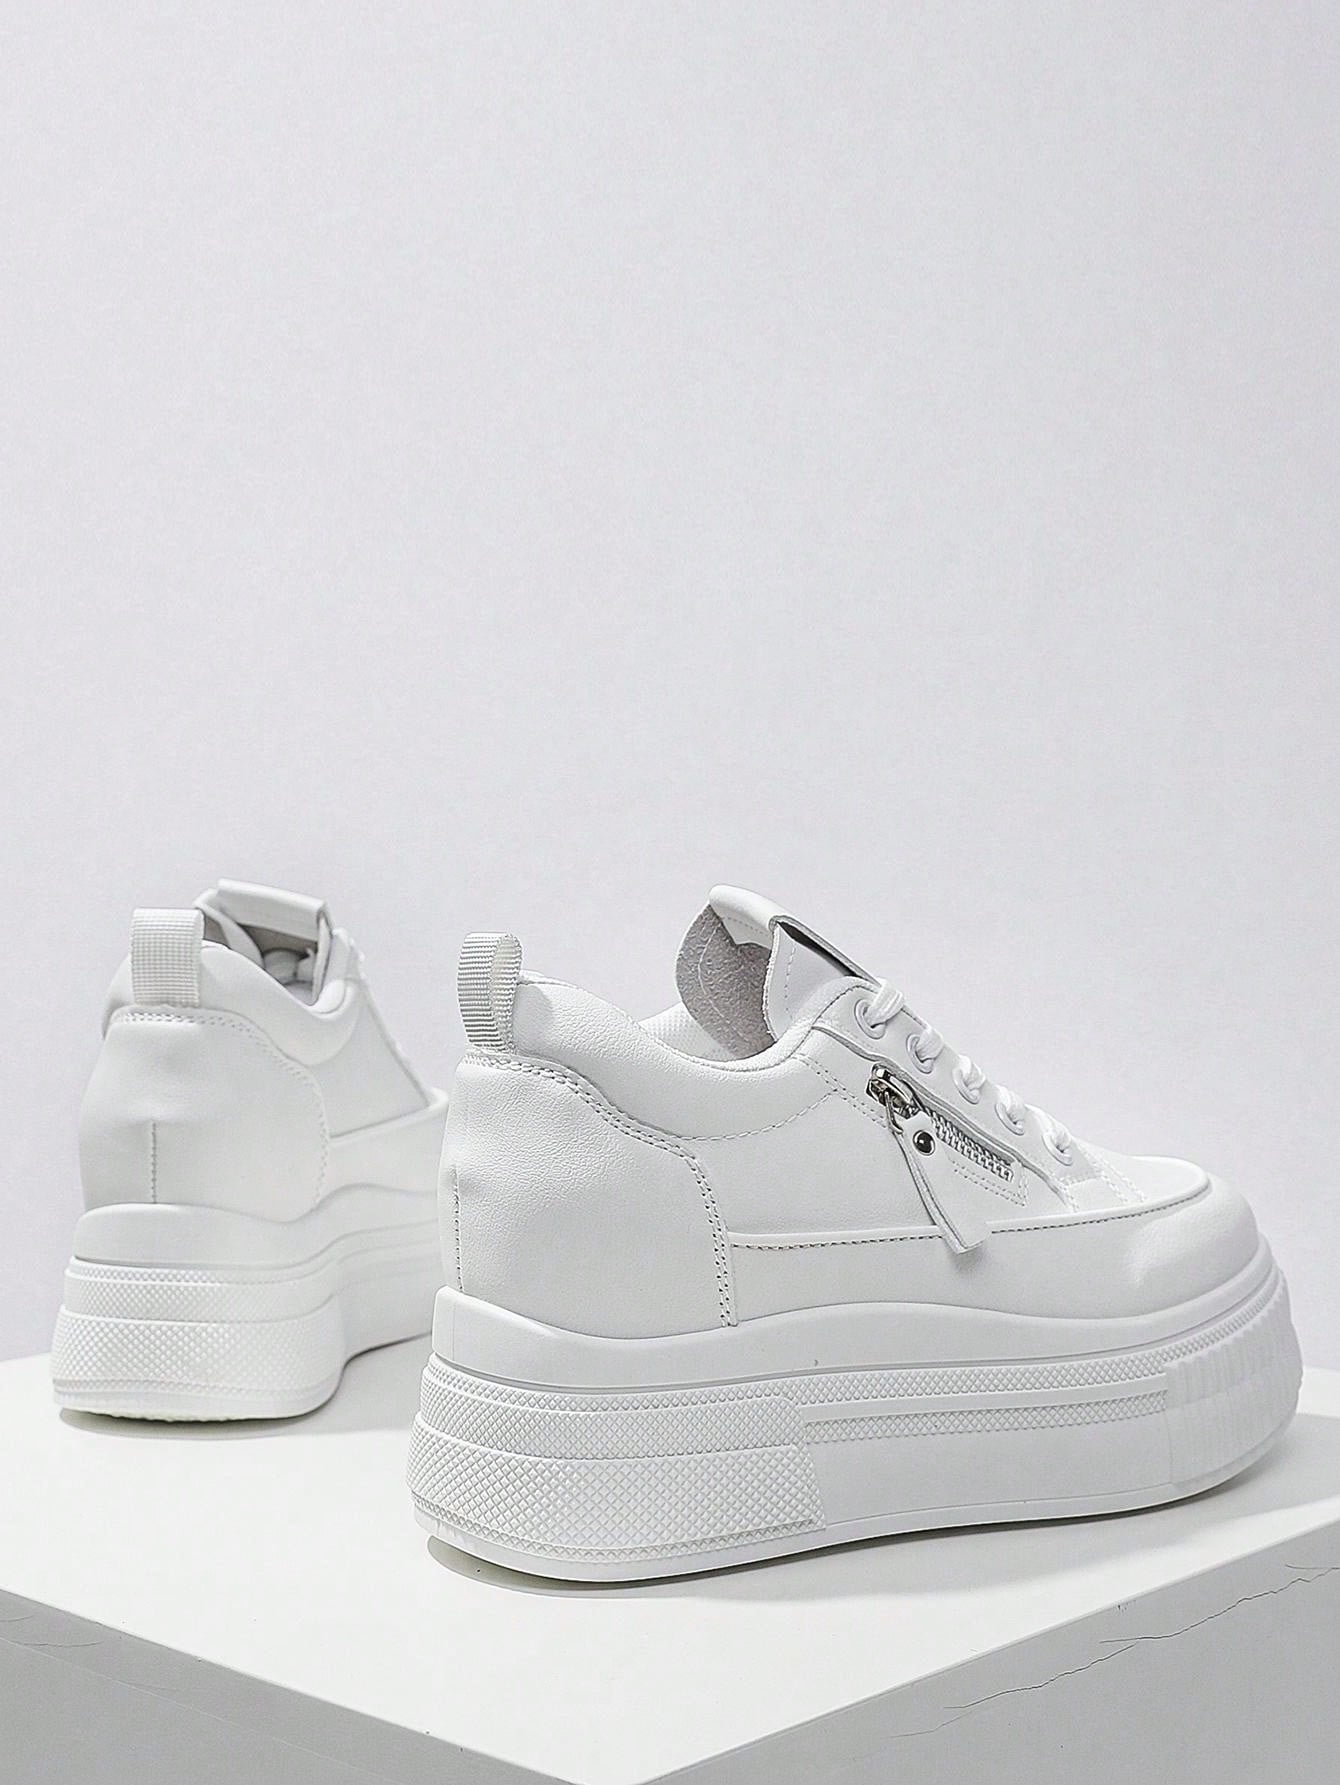 New Style Casual Shoes For Women, Ladies Platform Shoes With  Zipper, White Shoes, Outdoor Comfortable Sneakers, Internal Increase 5cm, Party Shoes, Suitable For Short Women-White-10